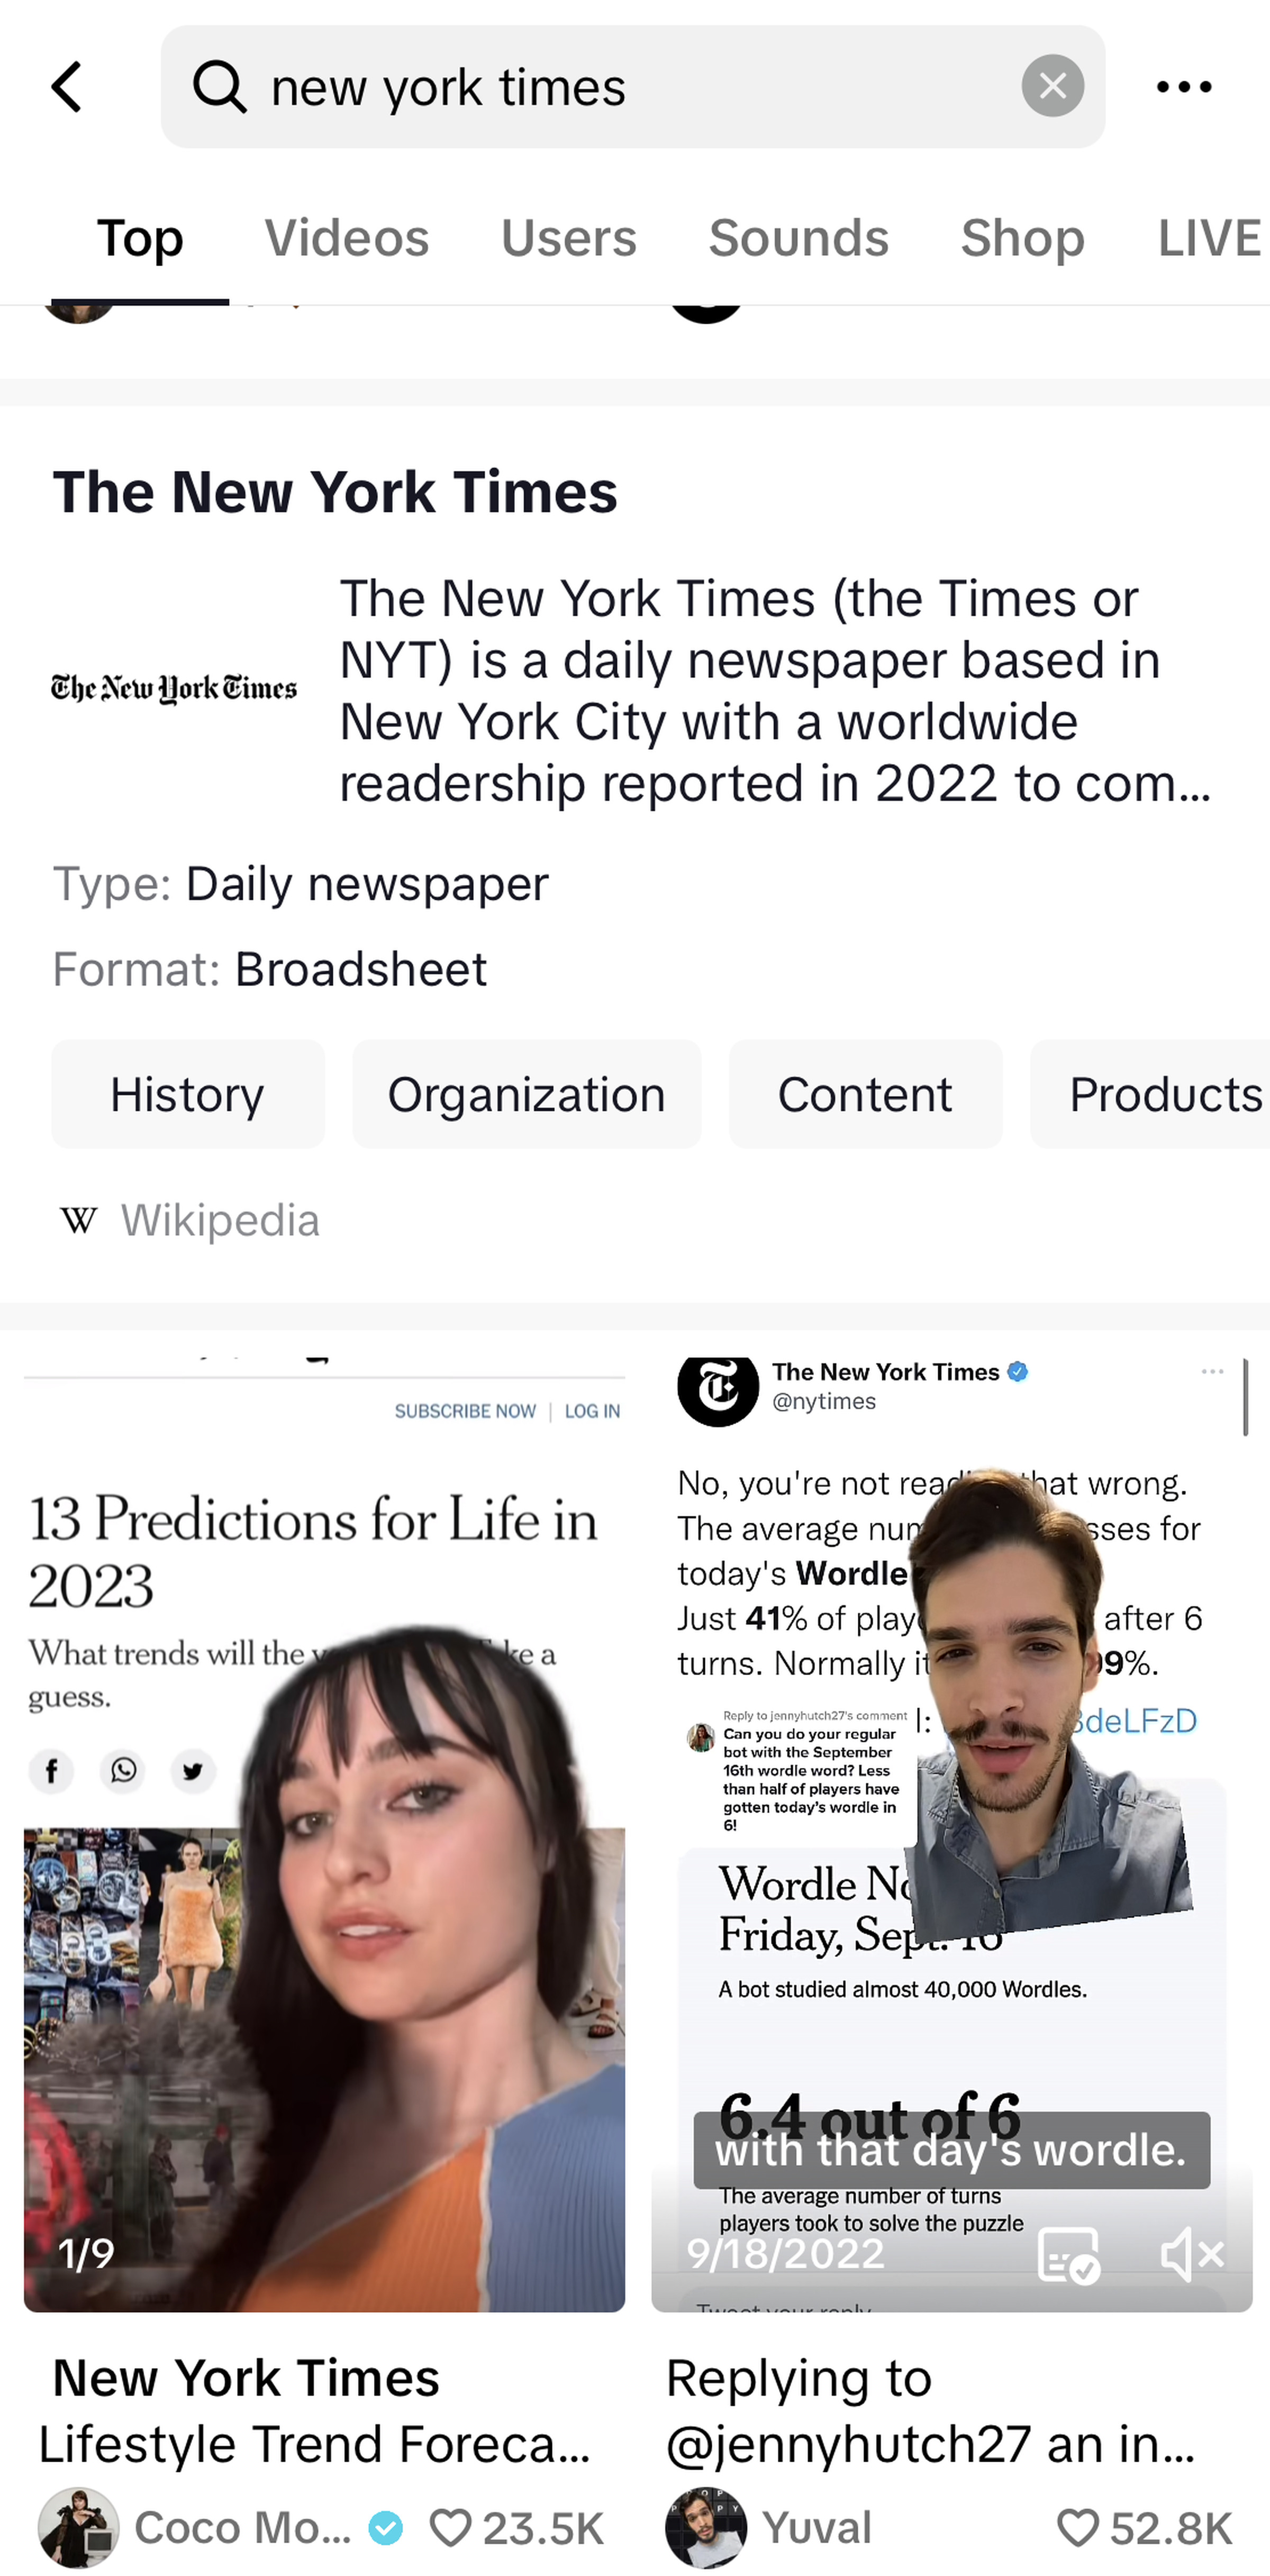 TikTok search results for “new york times” features relevant videos plus a link to The Times’ Wikipedia page